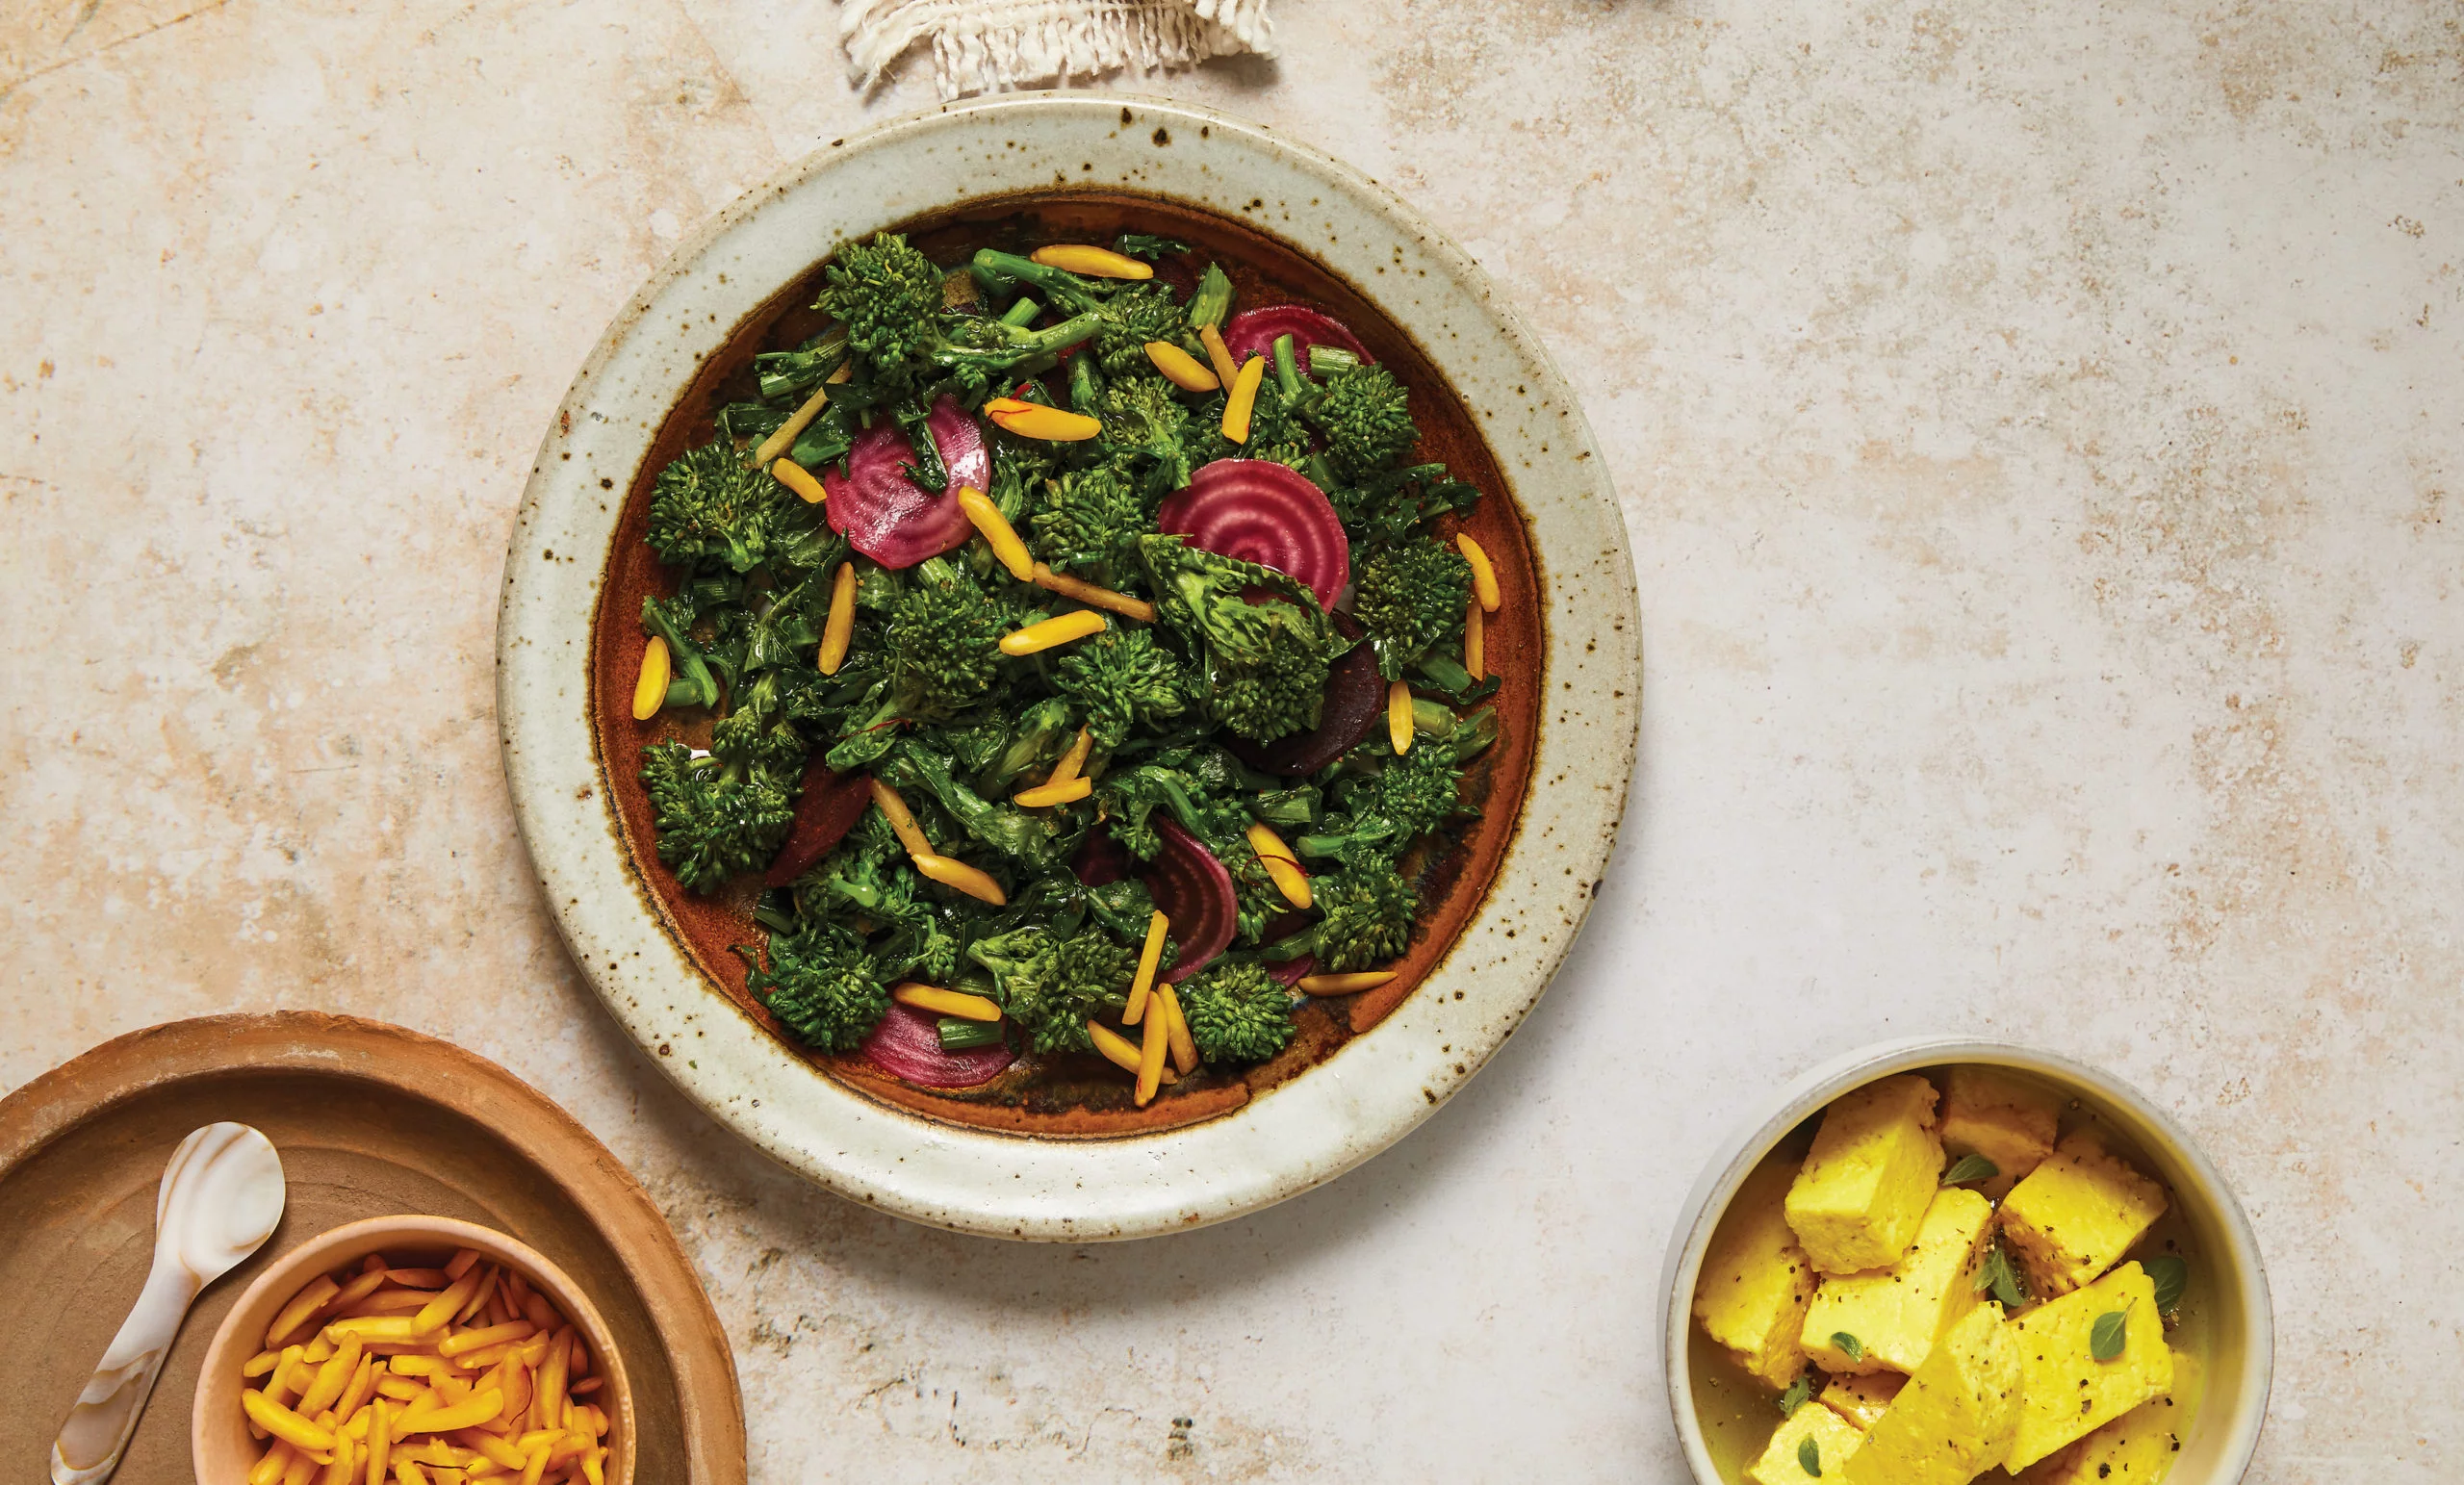 Sauteed Broccoli Rabe and Beets with Saffron Almonds